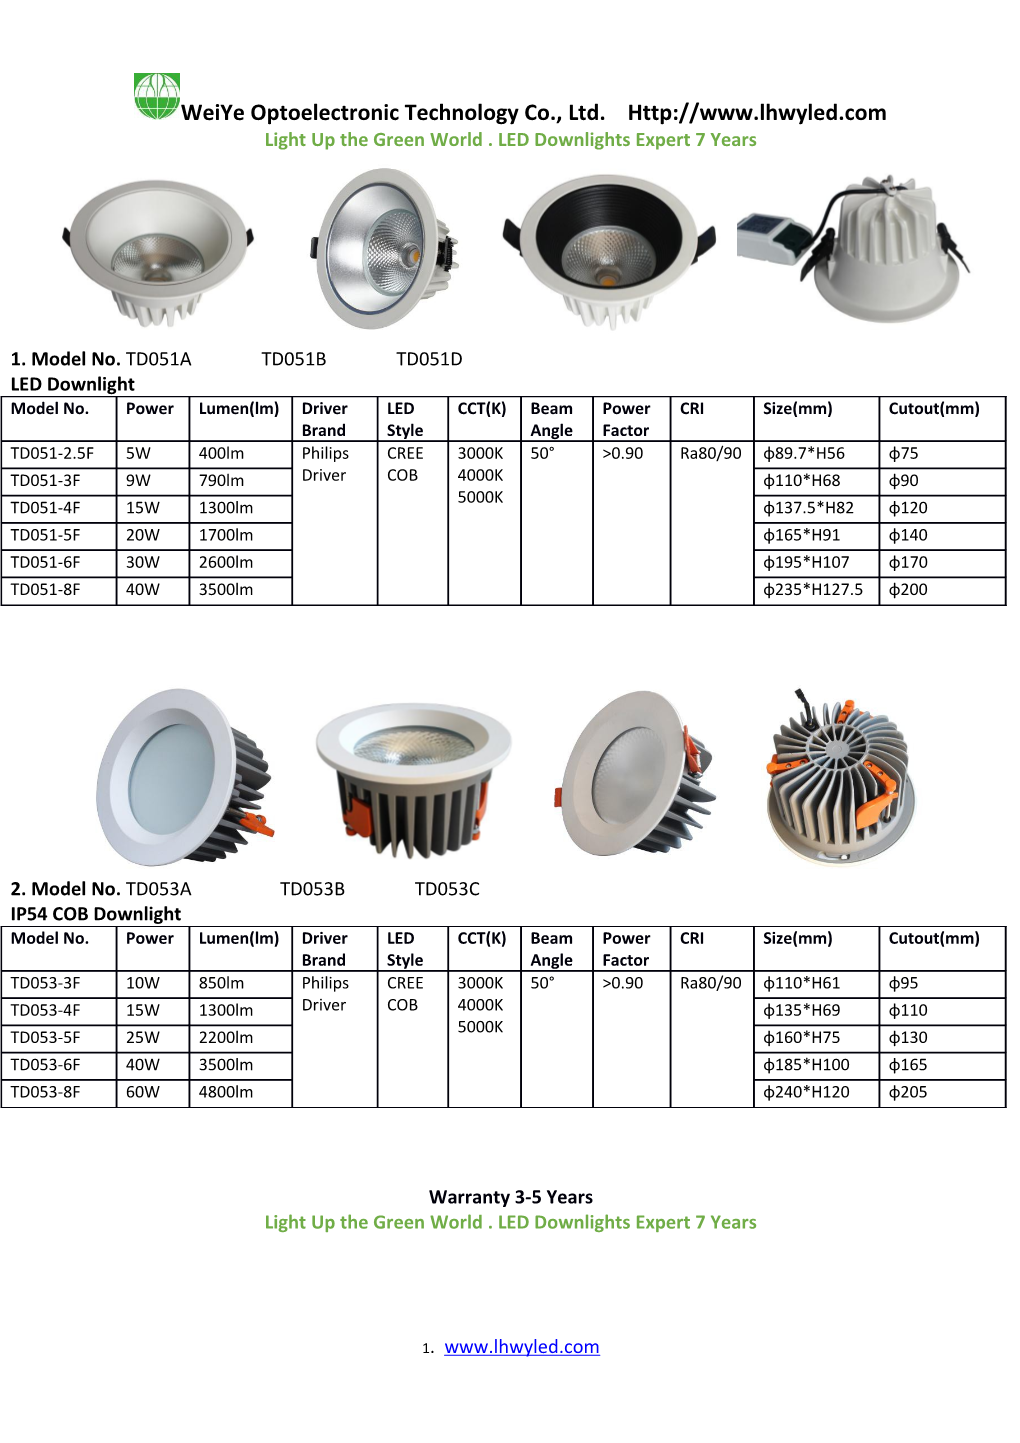 Light up the Green World . LED Downlights Expert 7 Years